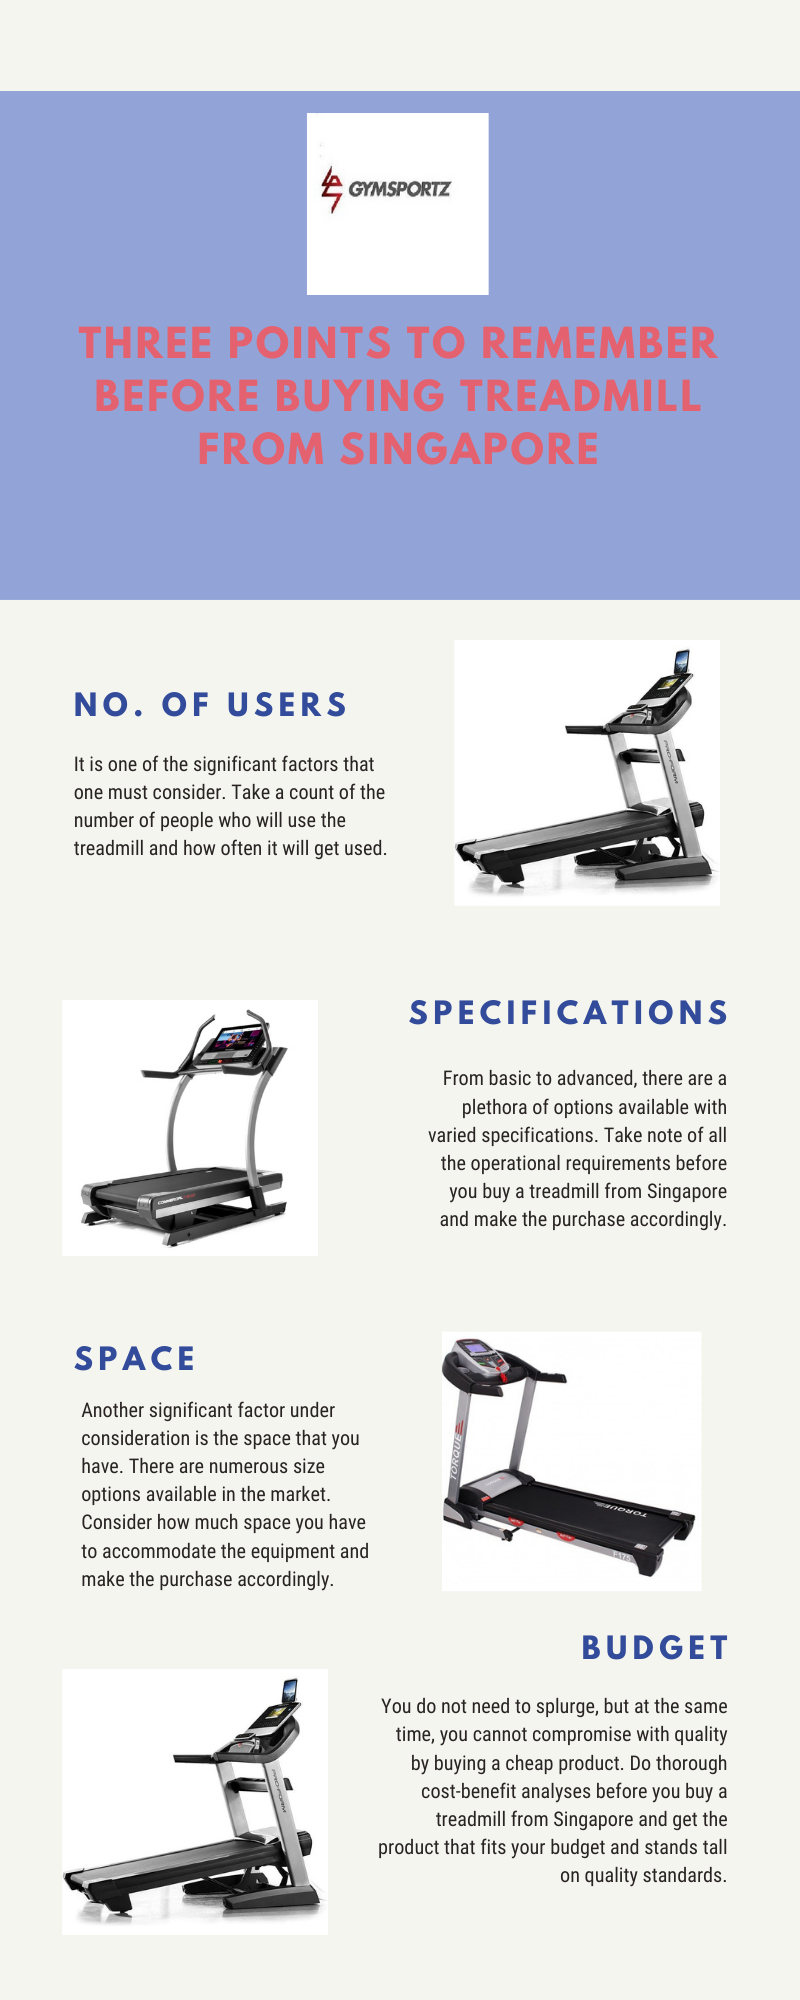 Three Points to Remember Before Buying Treadmill from Singapore A treadmill is most likely the first thing that comes to mind when someone plans to set up a home gym. https://gymsportz.sg/cardio-equipment/treadmills/ by Gymsportz